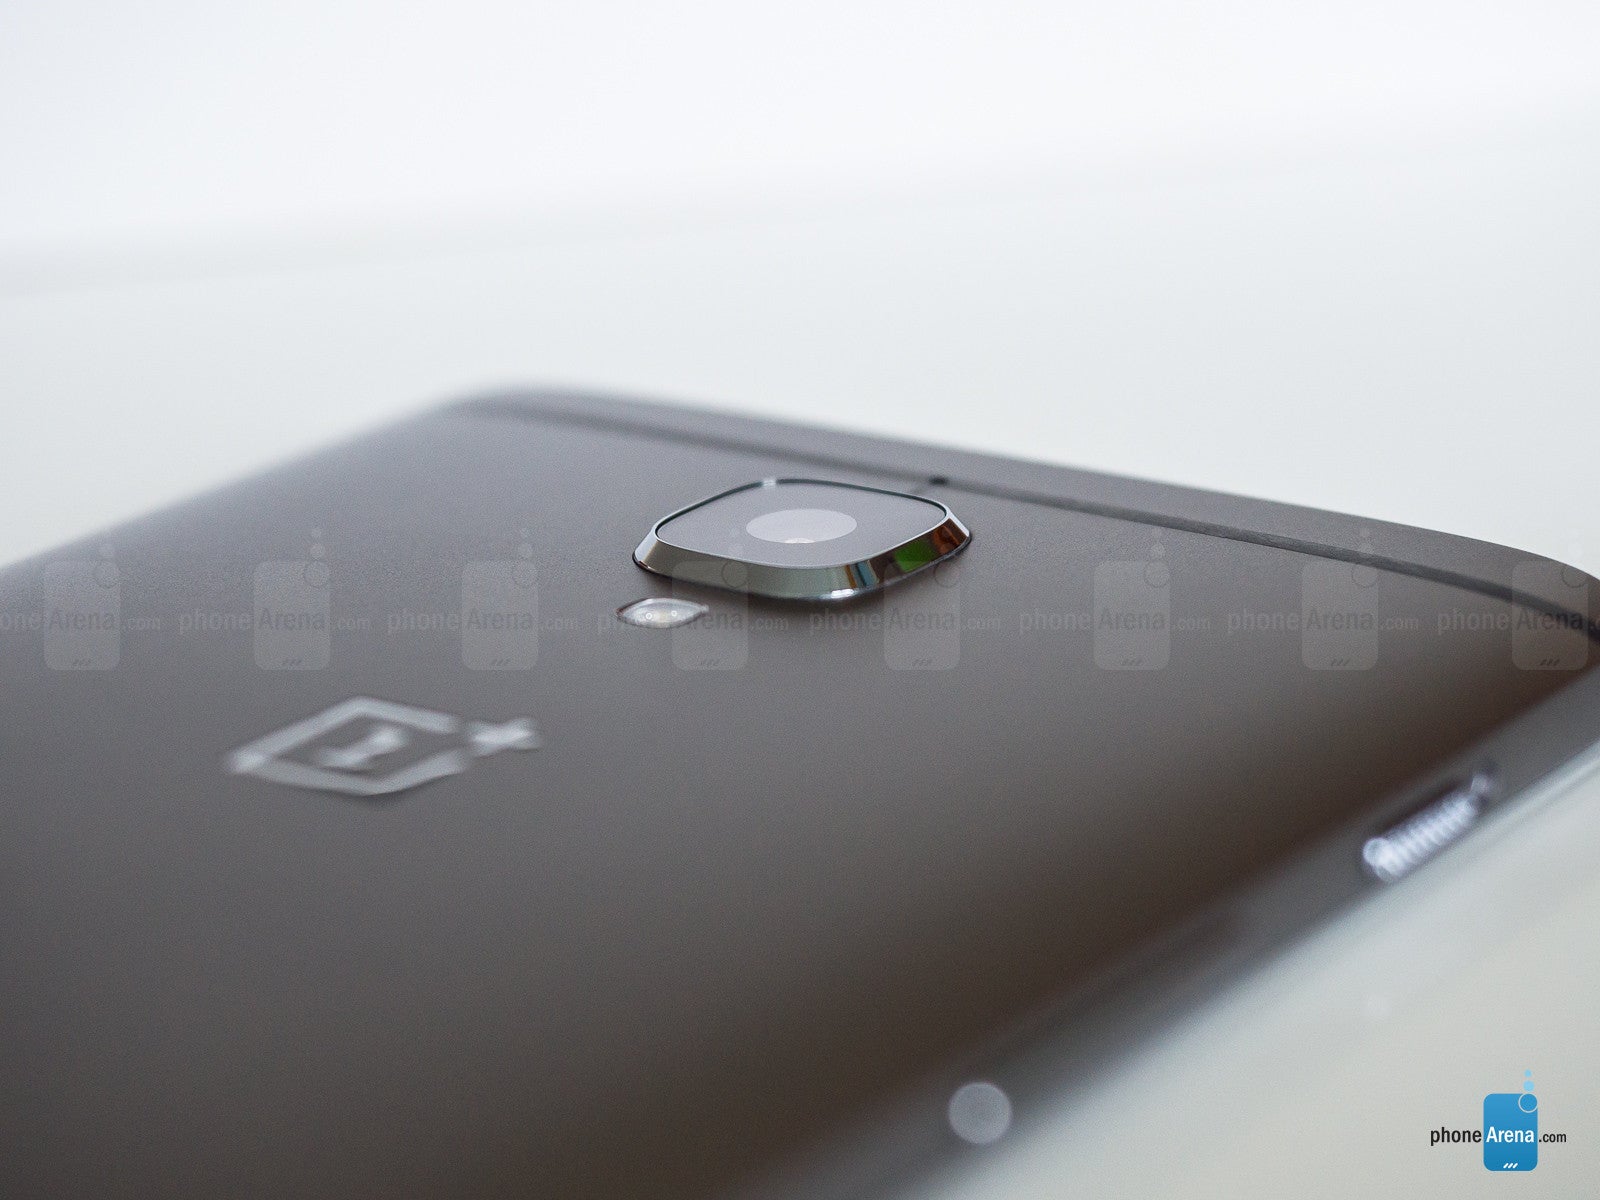 OxygenOS 4.0.2 update rolling out to OnePlus 3 and 3T, Wi-Fi connectivity issues persist